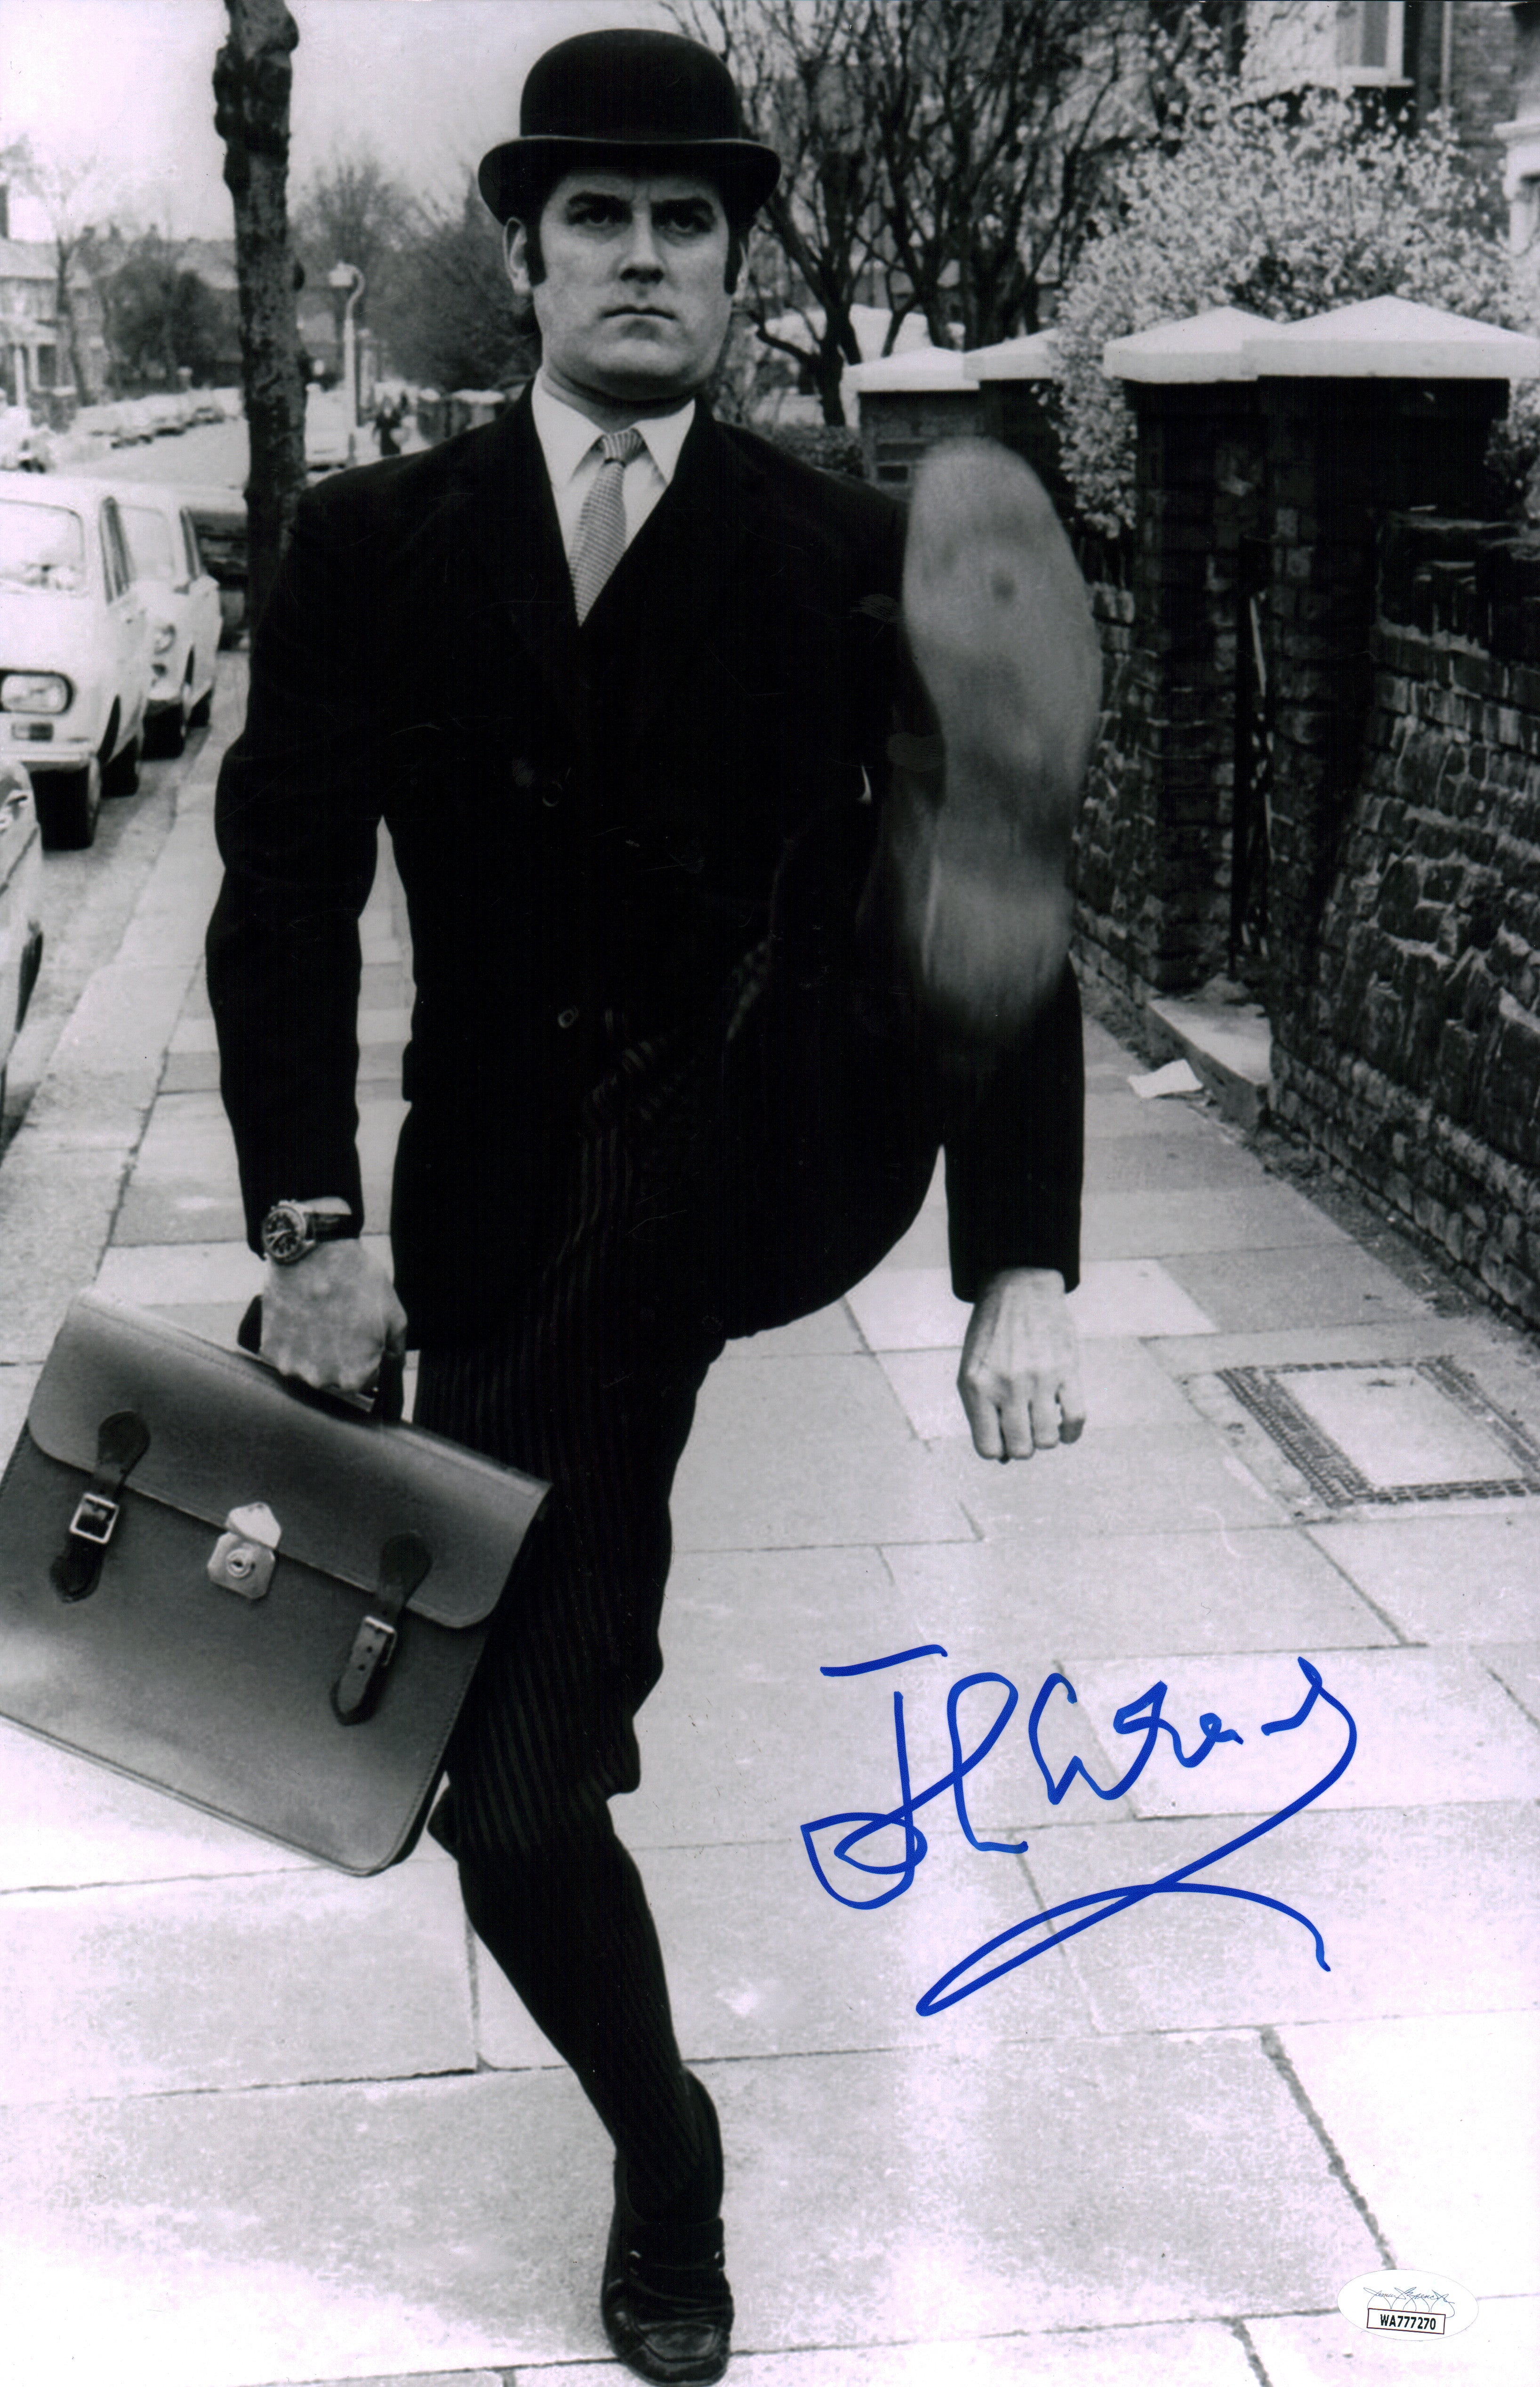 John Cleese Monty Python's Flying Circus 11x17 Signed Photo Poster JSA COA Certified Autograph